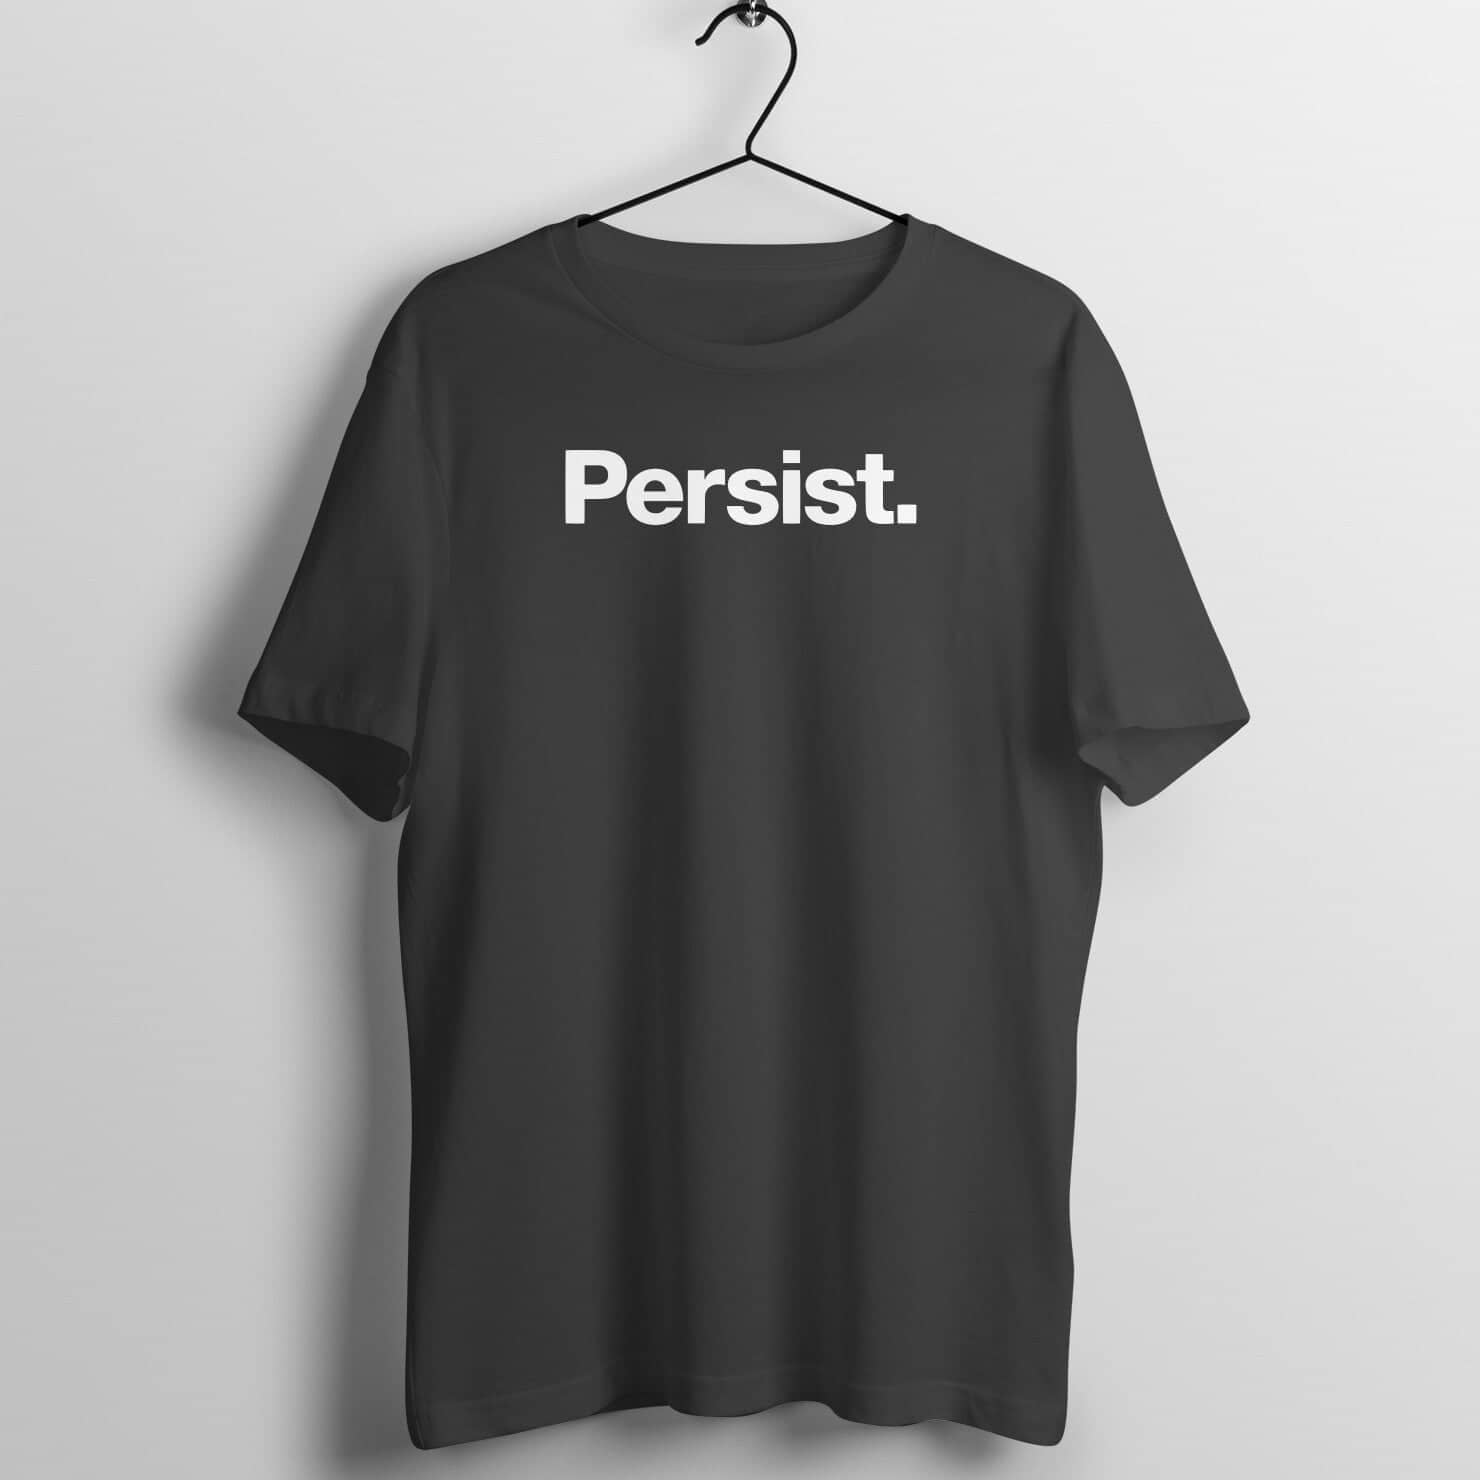 Persist Exclusive Black T Shirt for Men and Women freeshipping - Catch My Drift India